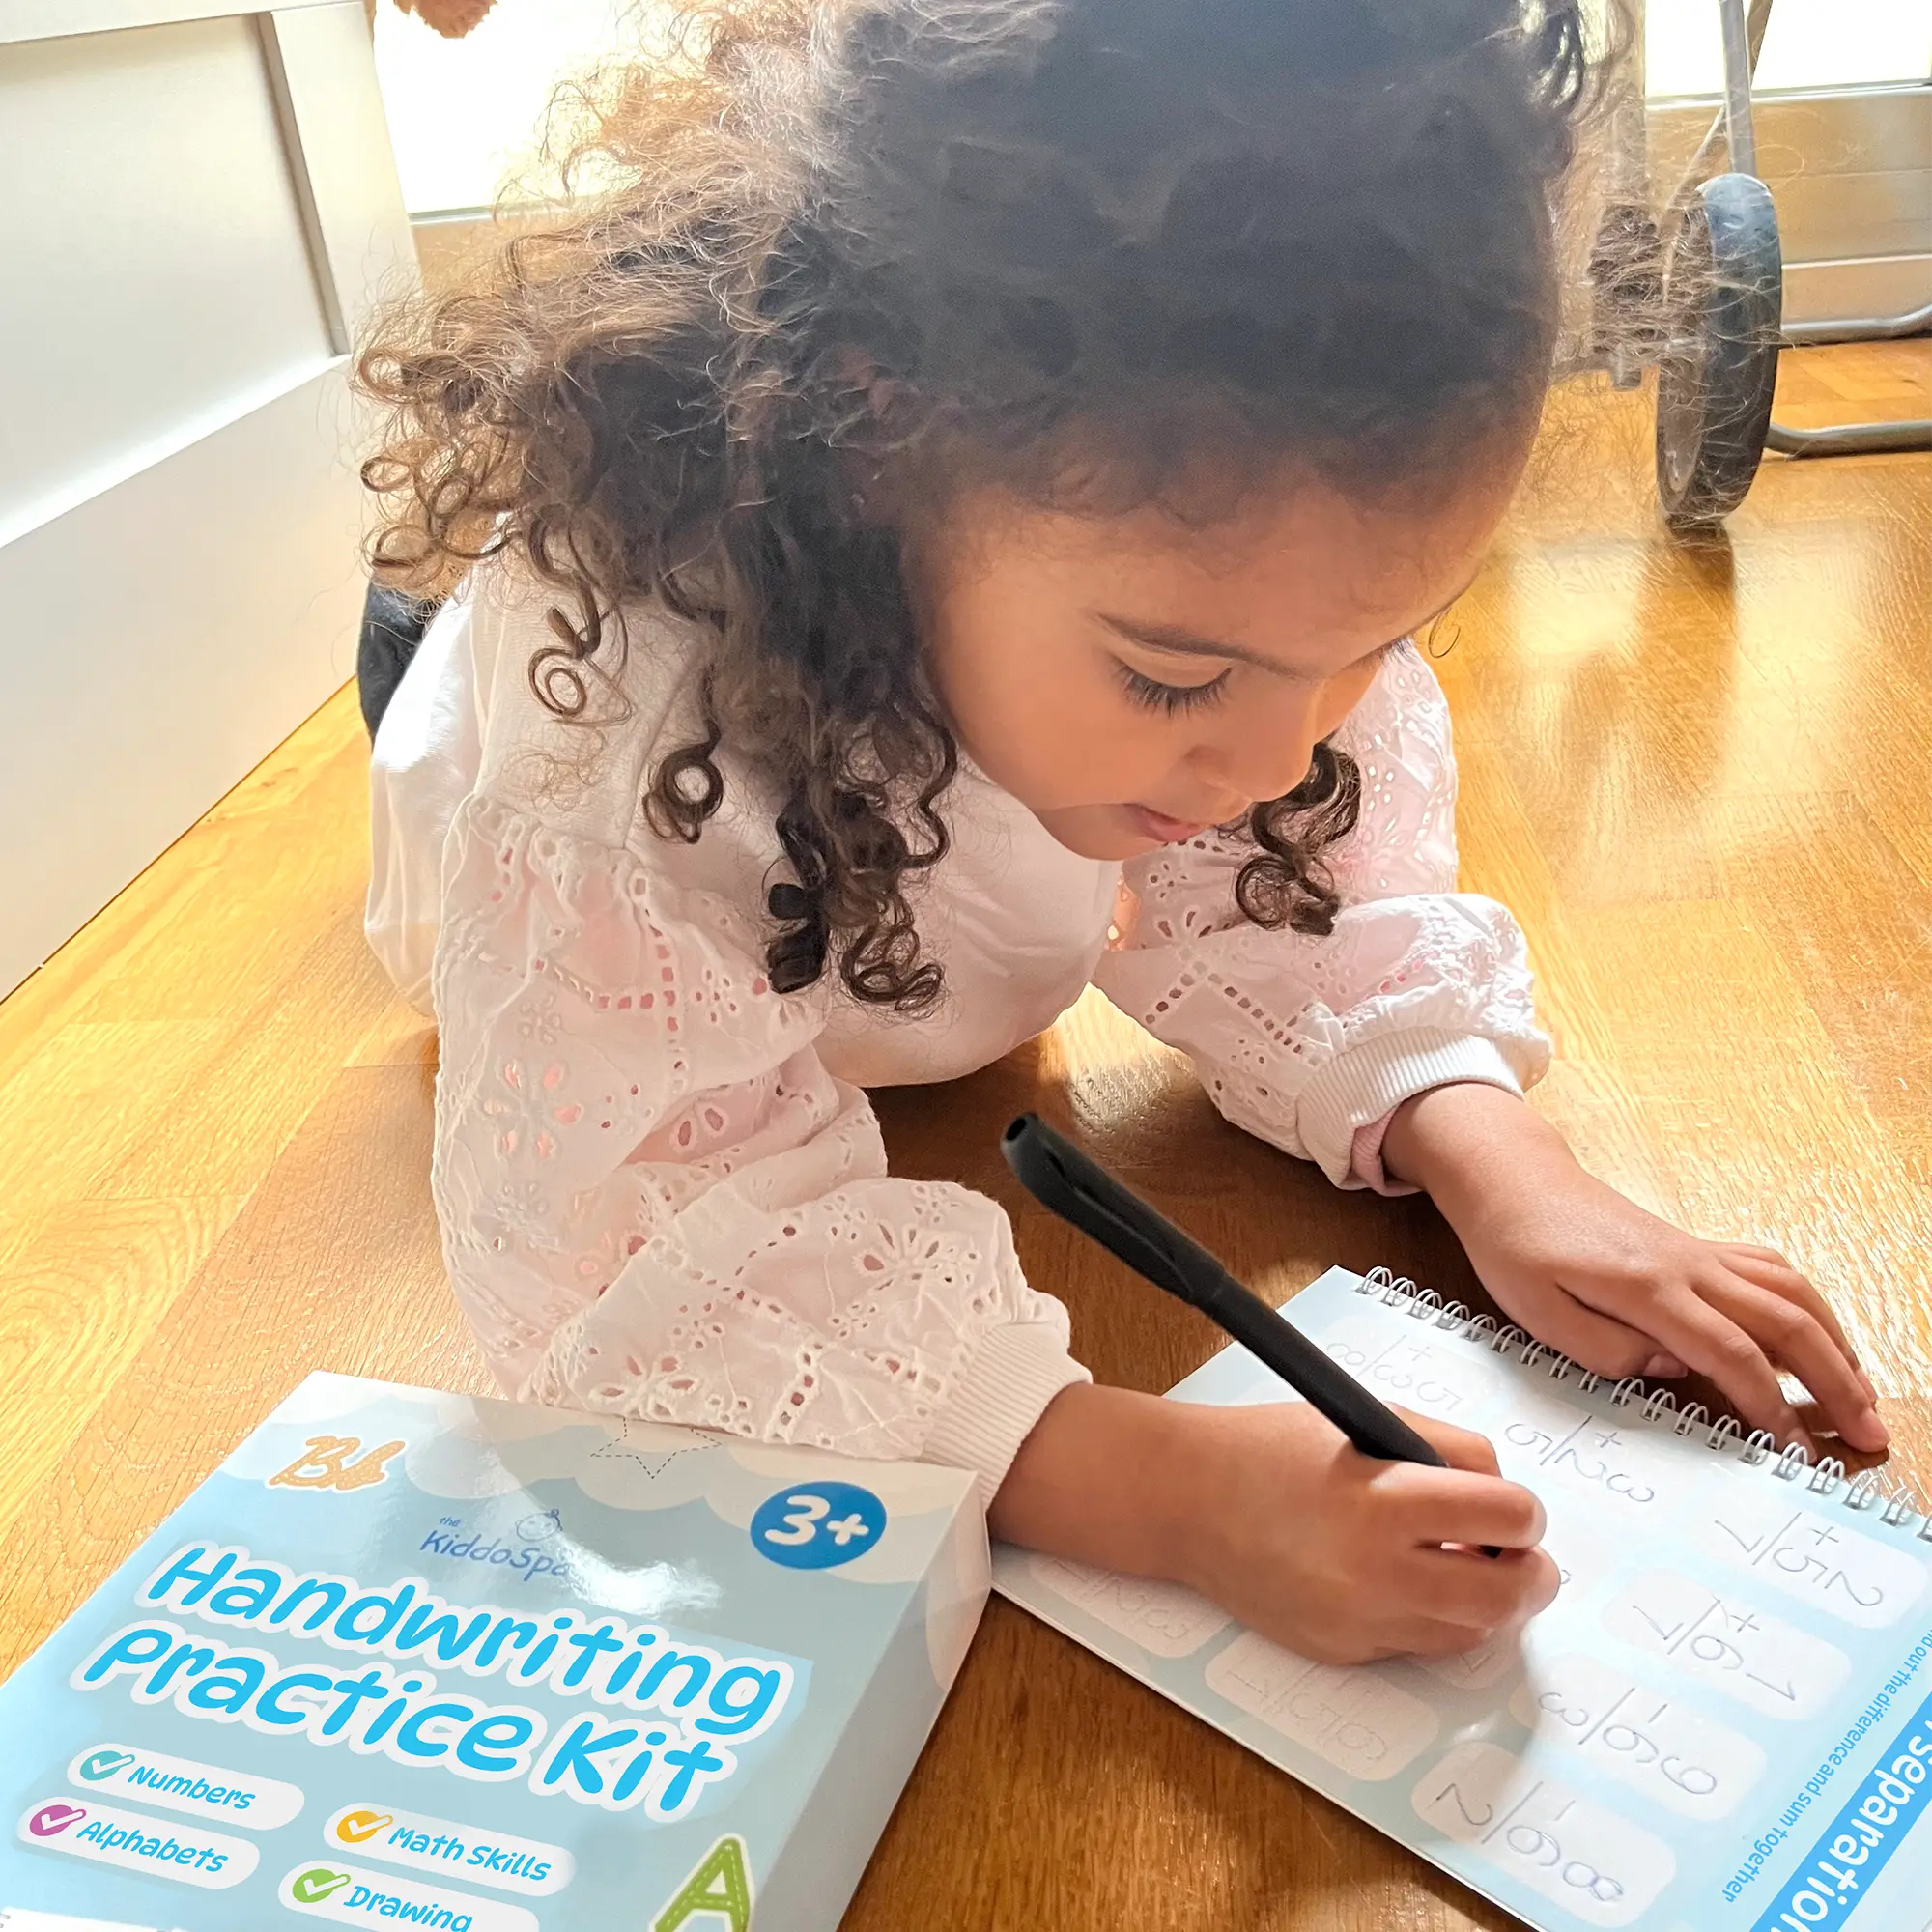 KiddoSpace’s Handwriting Practice Kit (4 A5 Books + 1 Special Ink Pen)